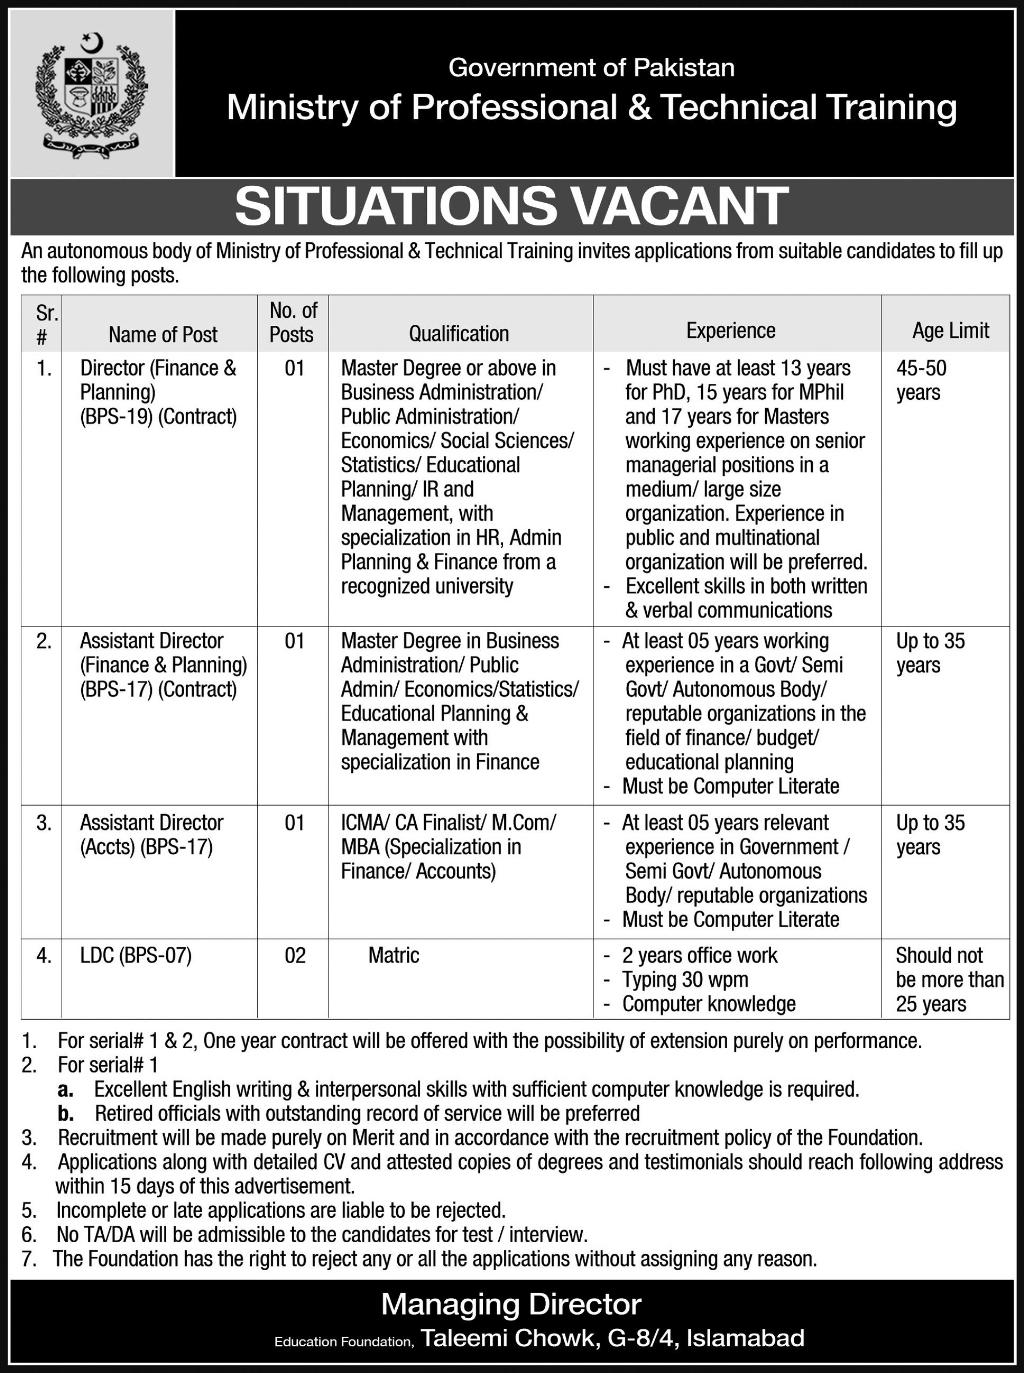 Directors Required at Ministry of Professional & Technical Training (Govt. job)